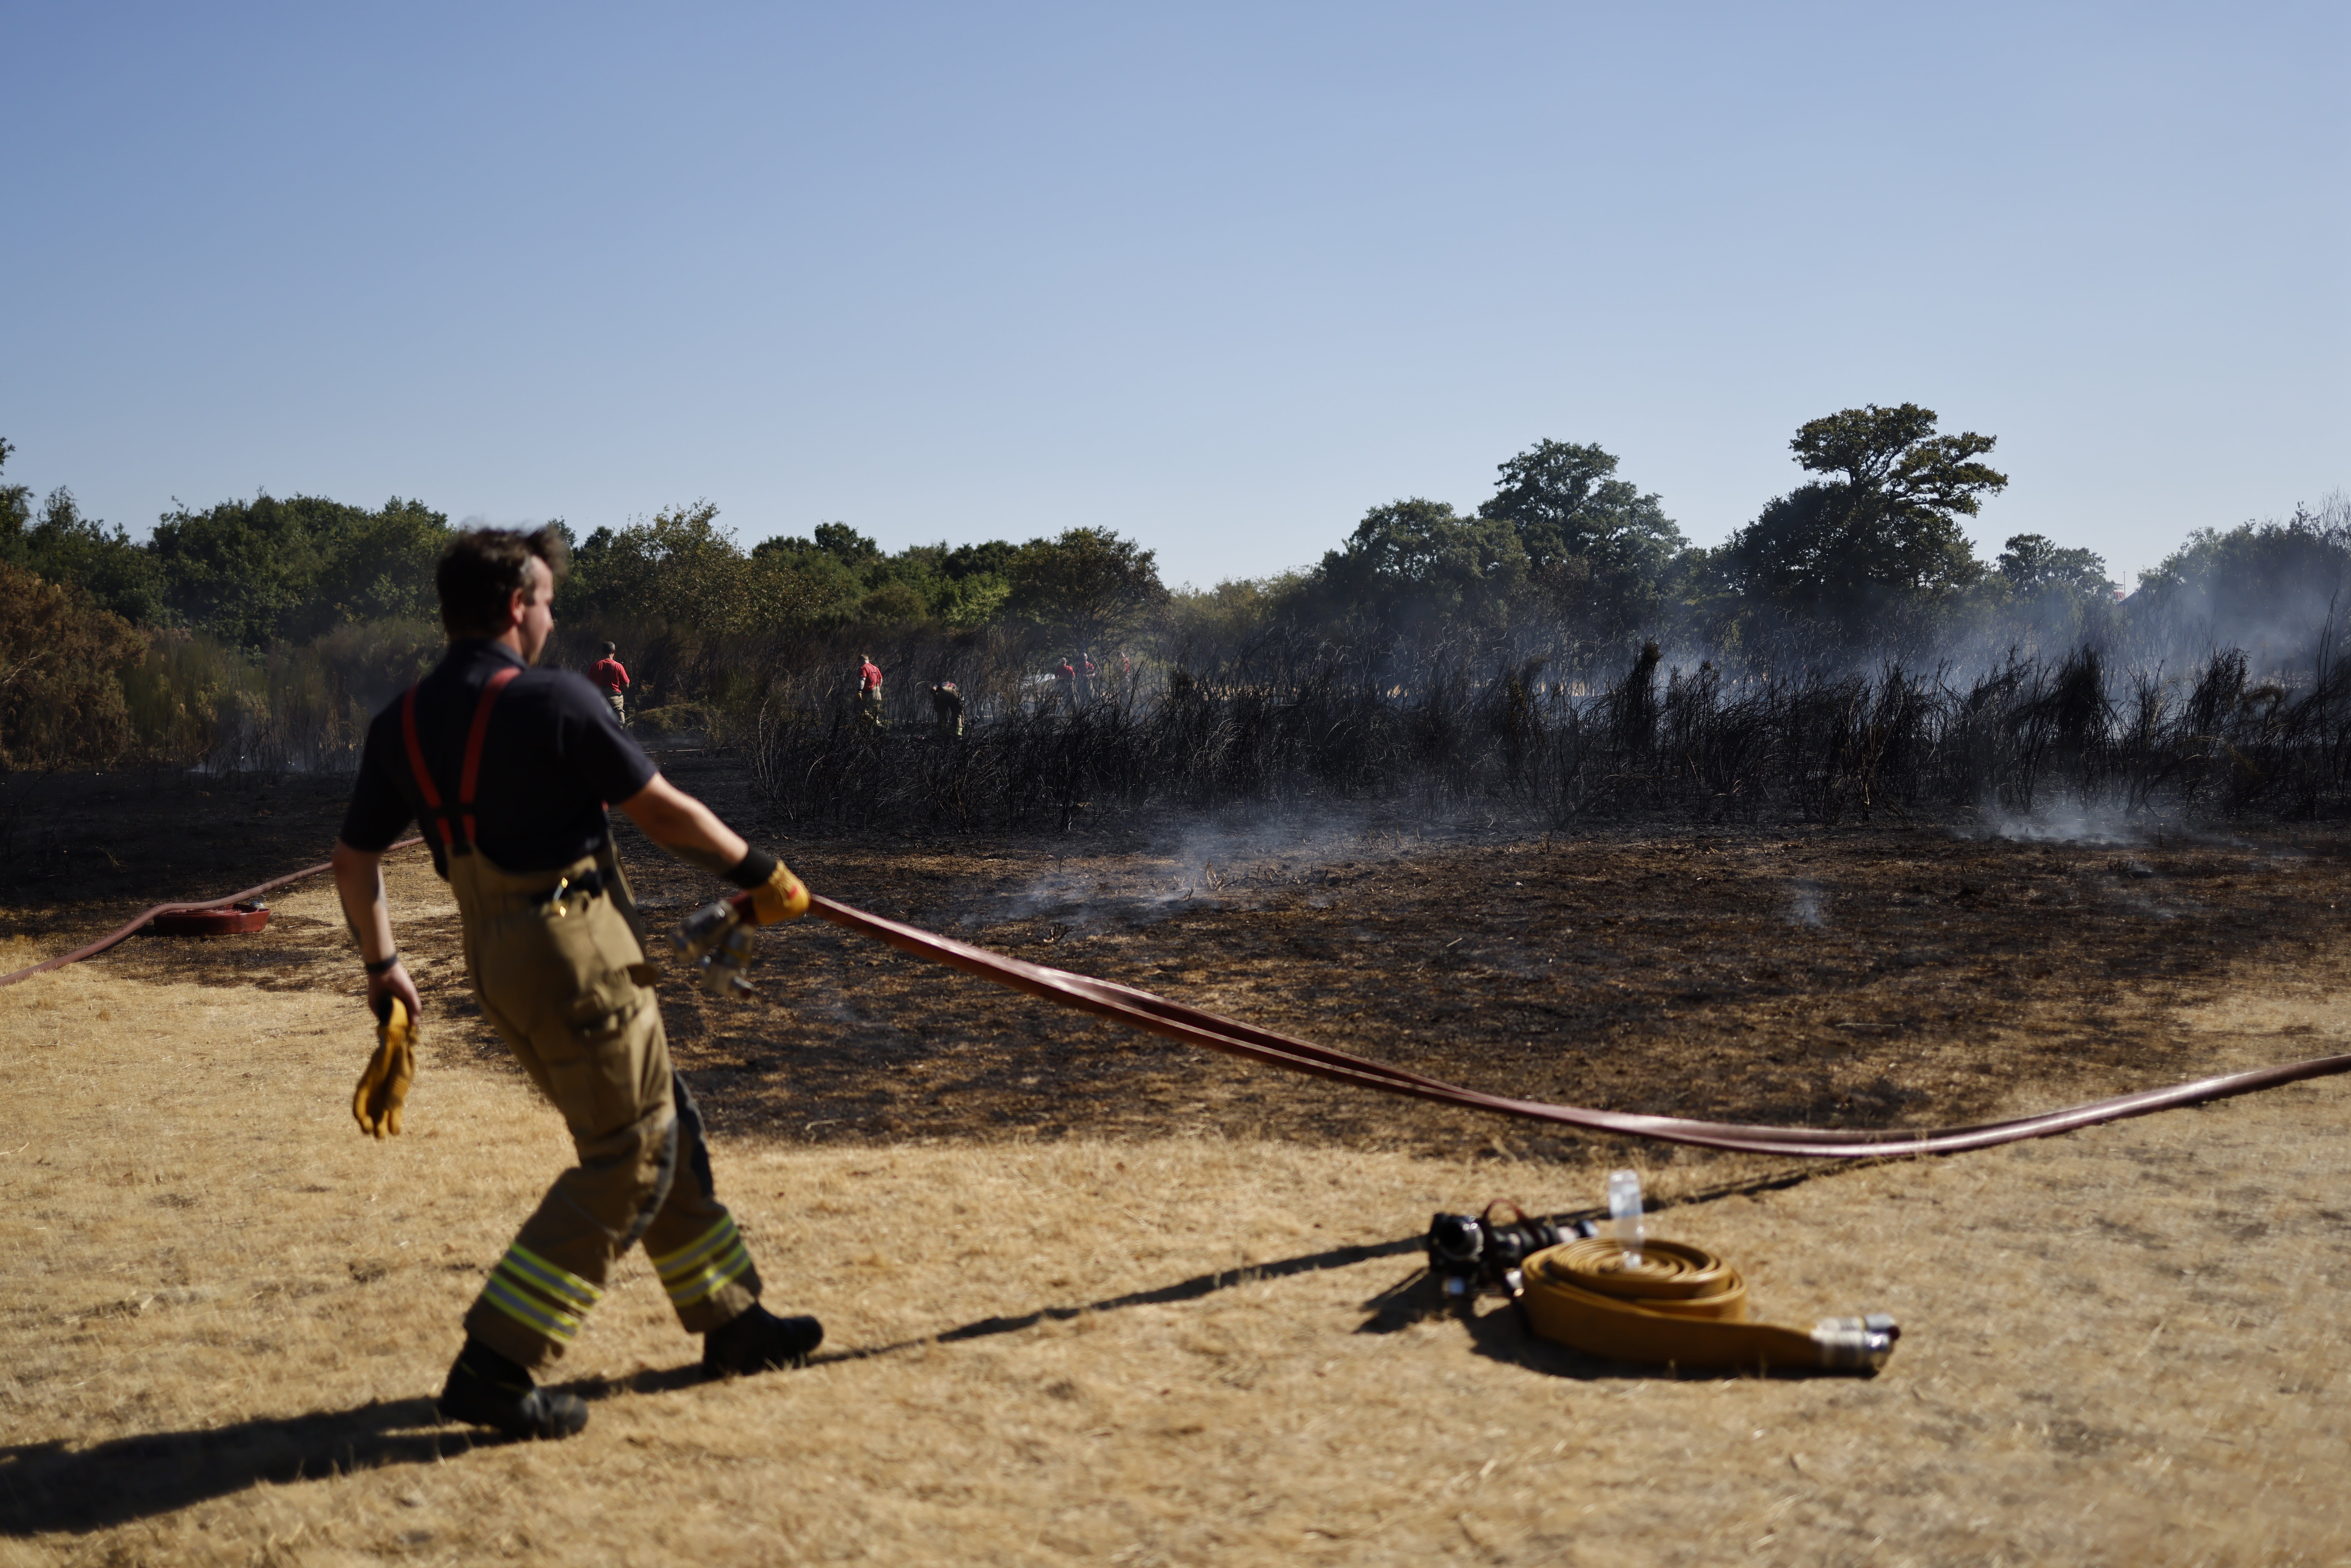 Firefighters have been tackling wildfires due to the extremely dry conditions